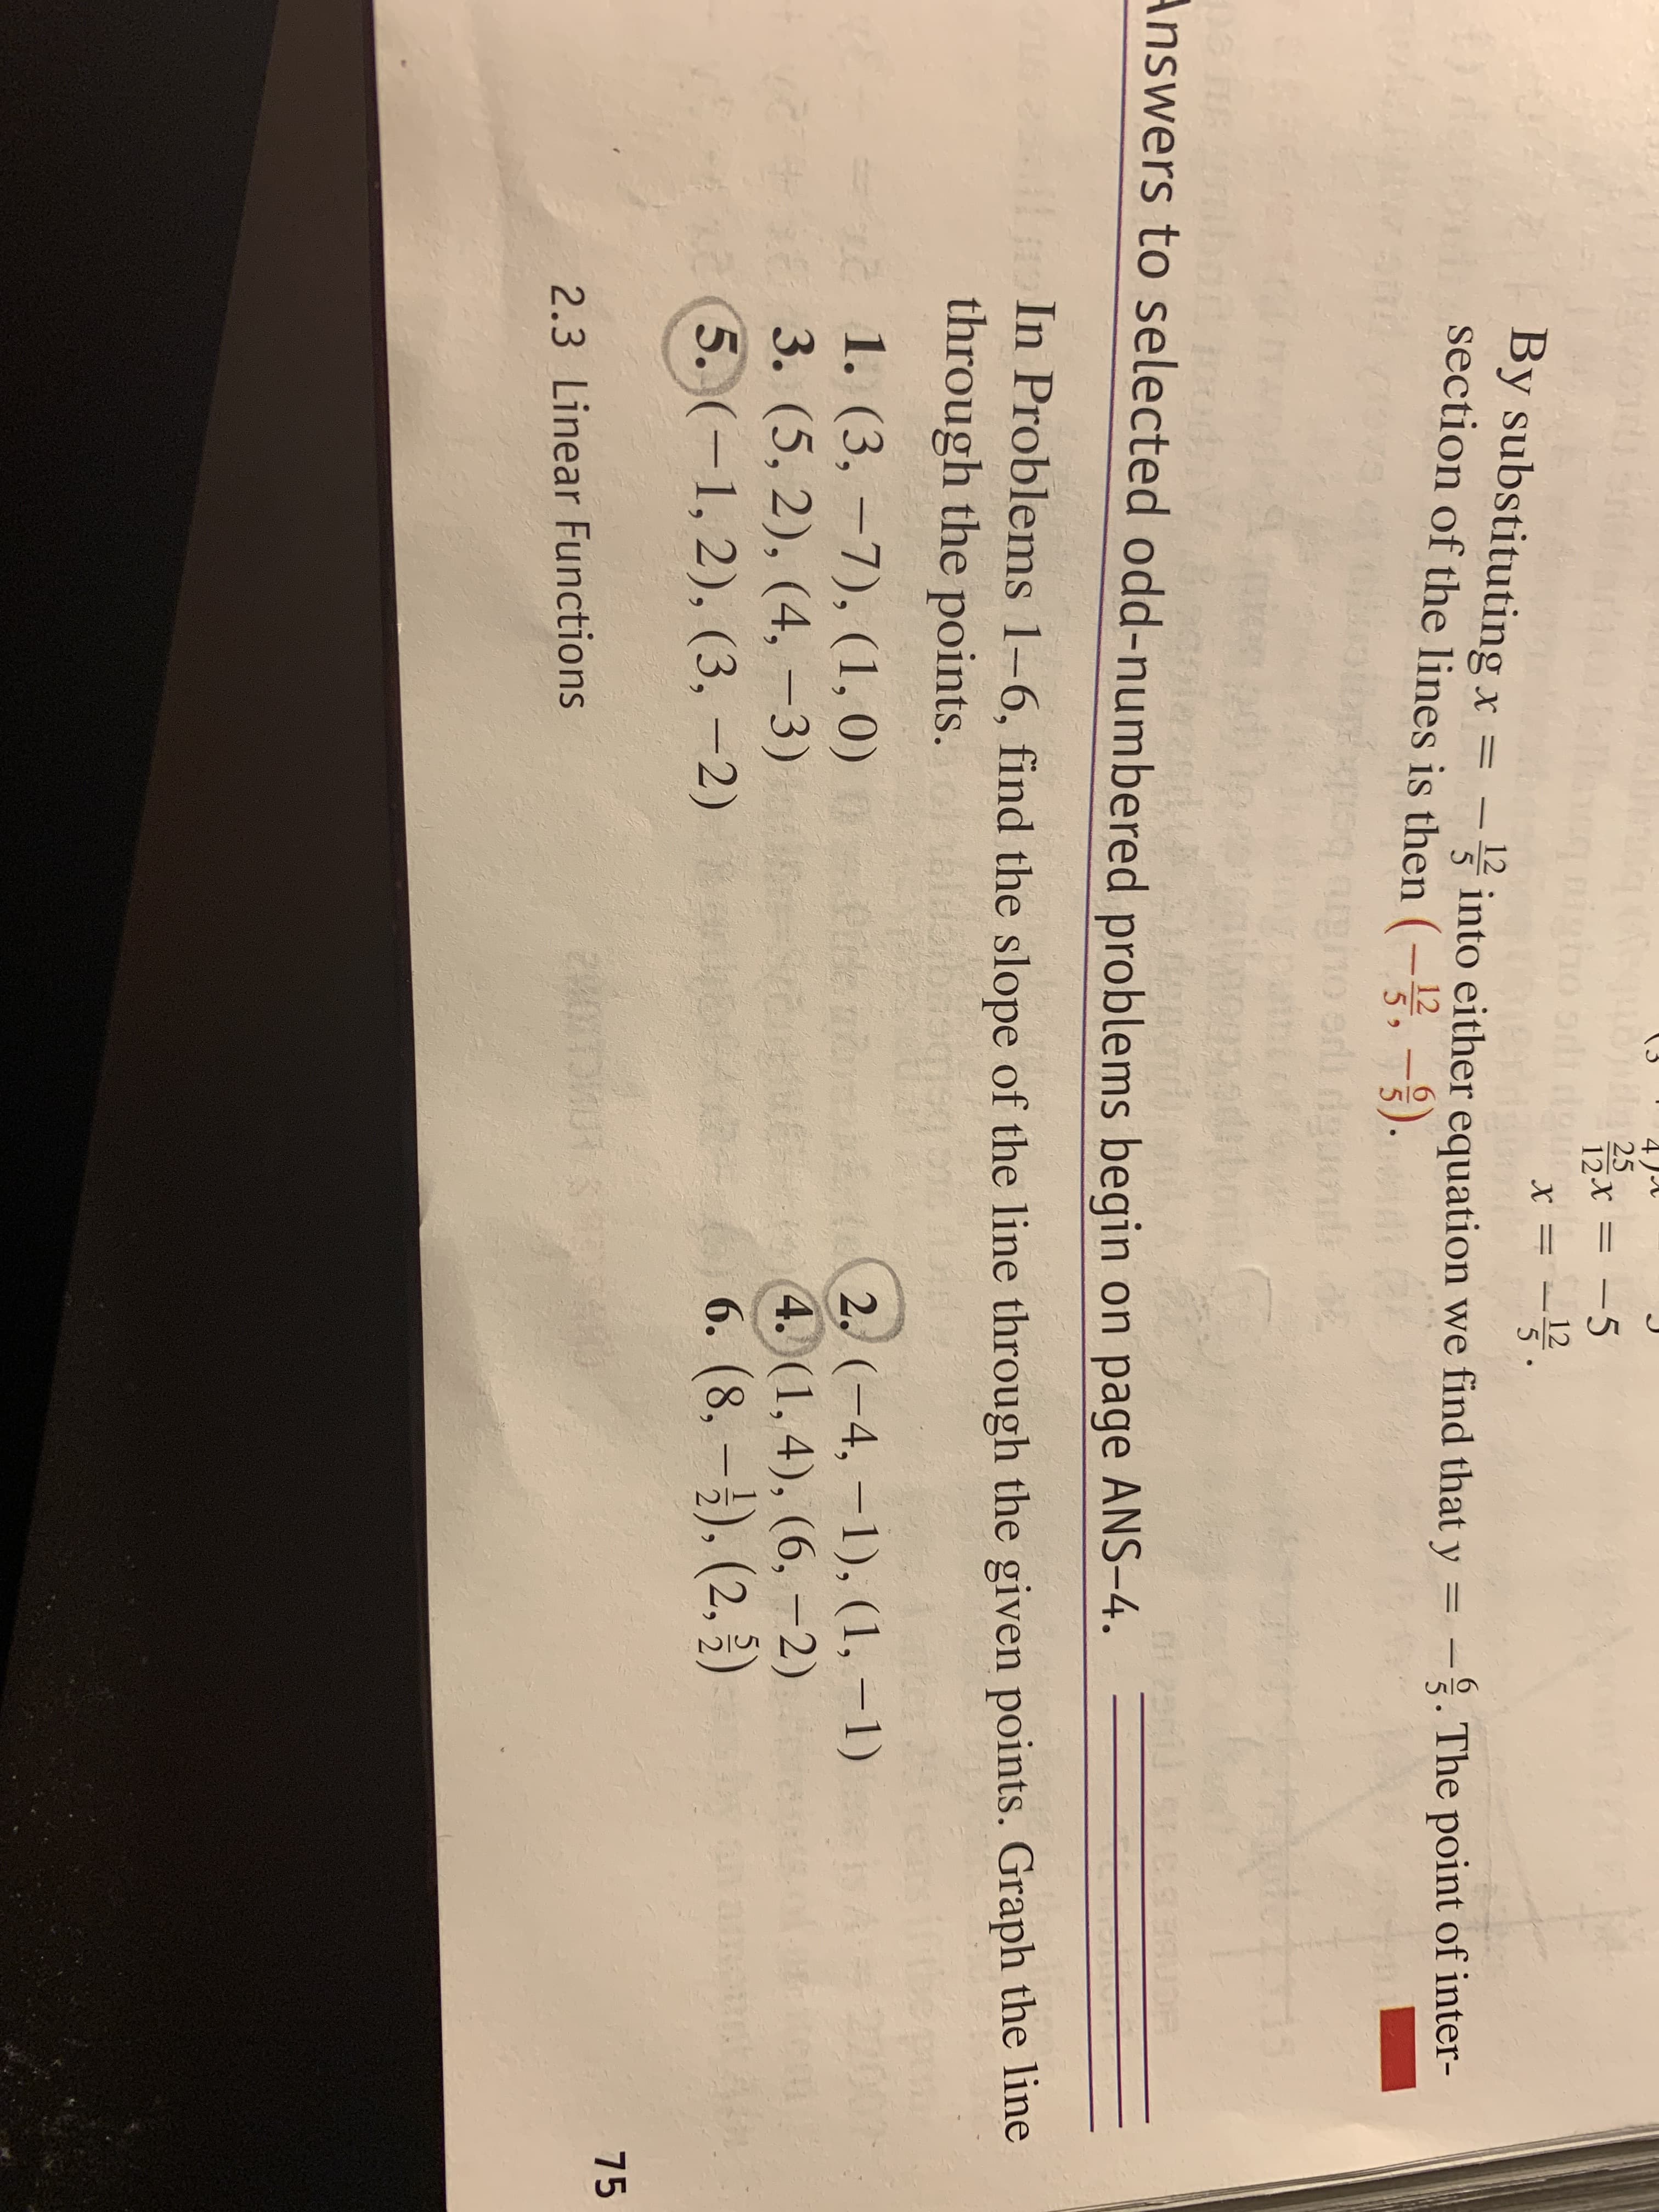 4 )A
gbtt 25
ho sdi doun
12X = -5
12
By substituting x =
section of the lines is then (-,-3).
12
5 into either equation we find that y = -. The point of inter-
12
5 >
bg
Answers to selected odd-numbered problems begin on page ANS-4.
In Problems 1–6, find the slope of the line through the given points. Graph the line
through the points.
2002
1. (3, -7), (1, 0)
3. (5, 2), (4,-3)
(5. (-1, 2), (3, -2)
2. (-4, -1), (1, –1)
4. (1, 4), (6, –2)
6. (8, –). (2, 3)
-e n
75
2.3 Linear Functions
